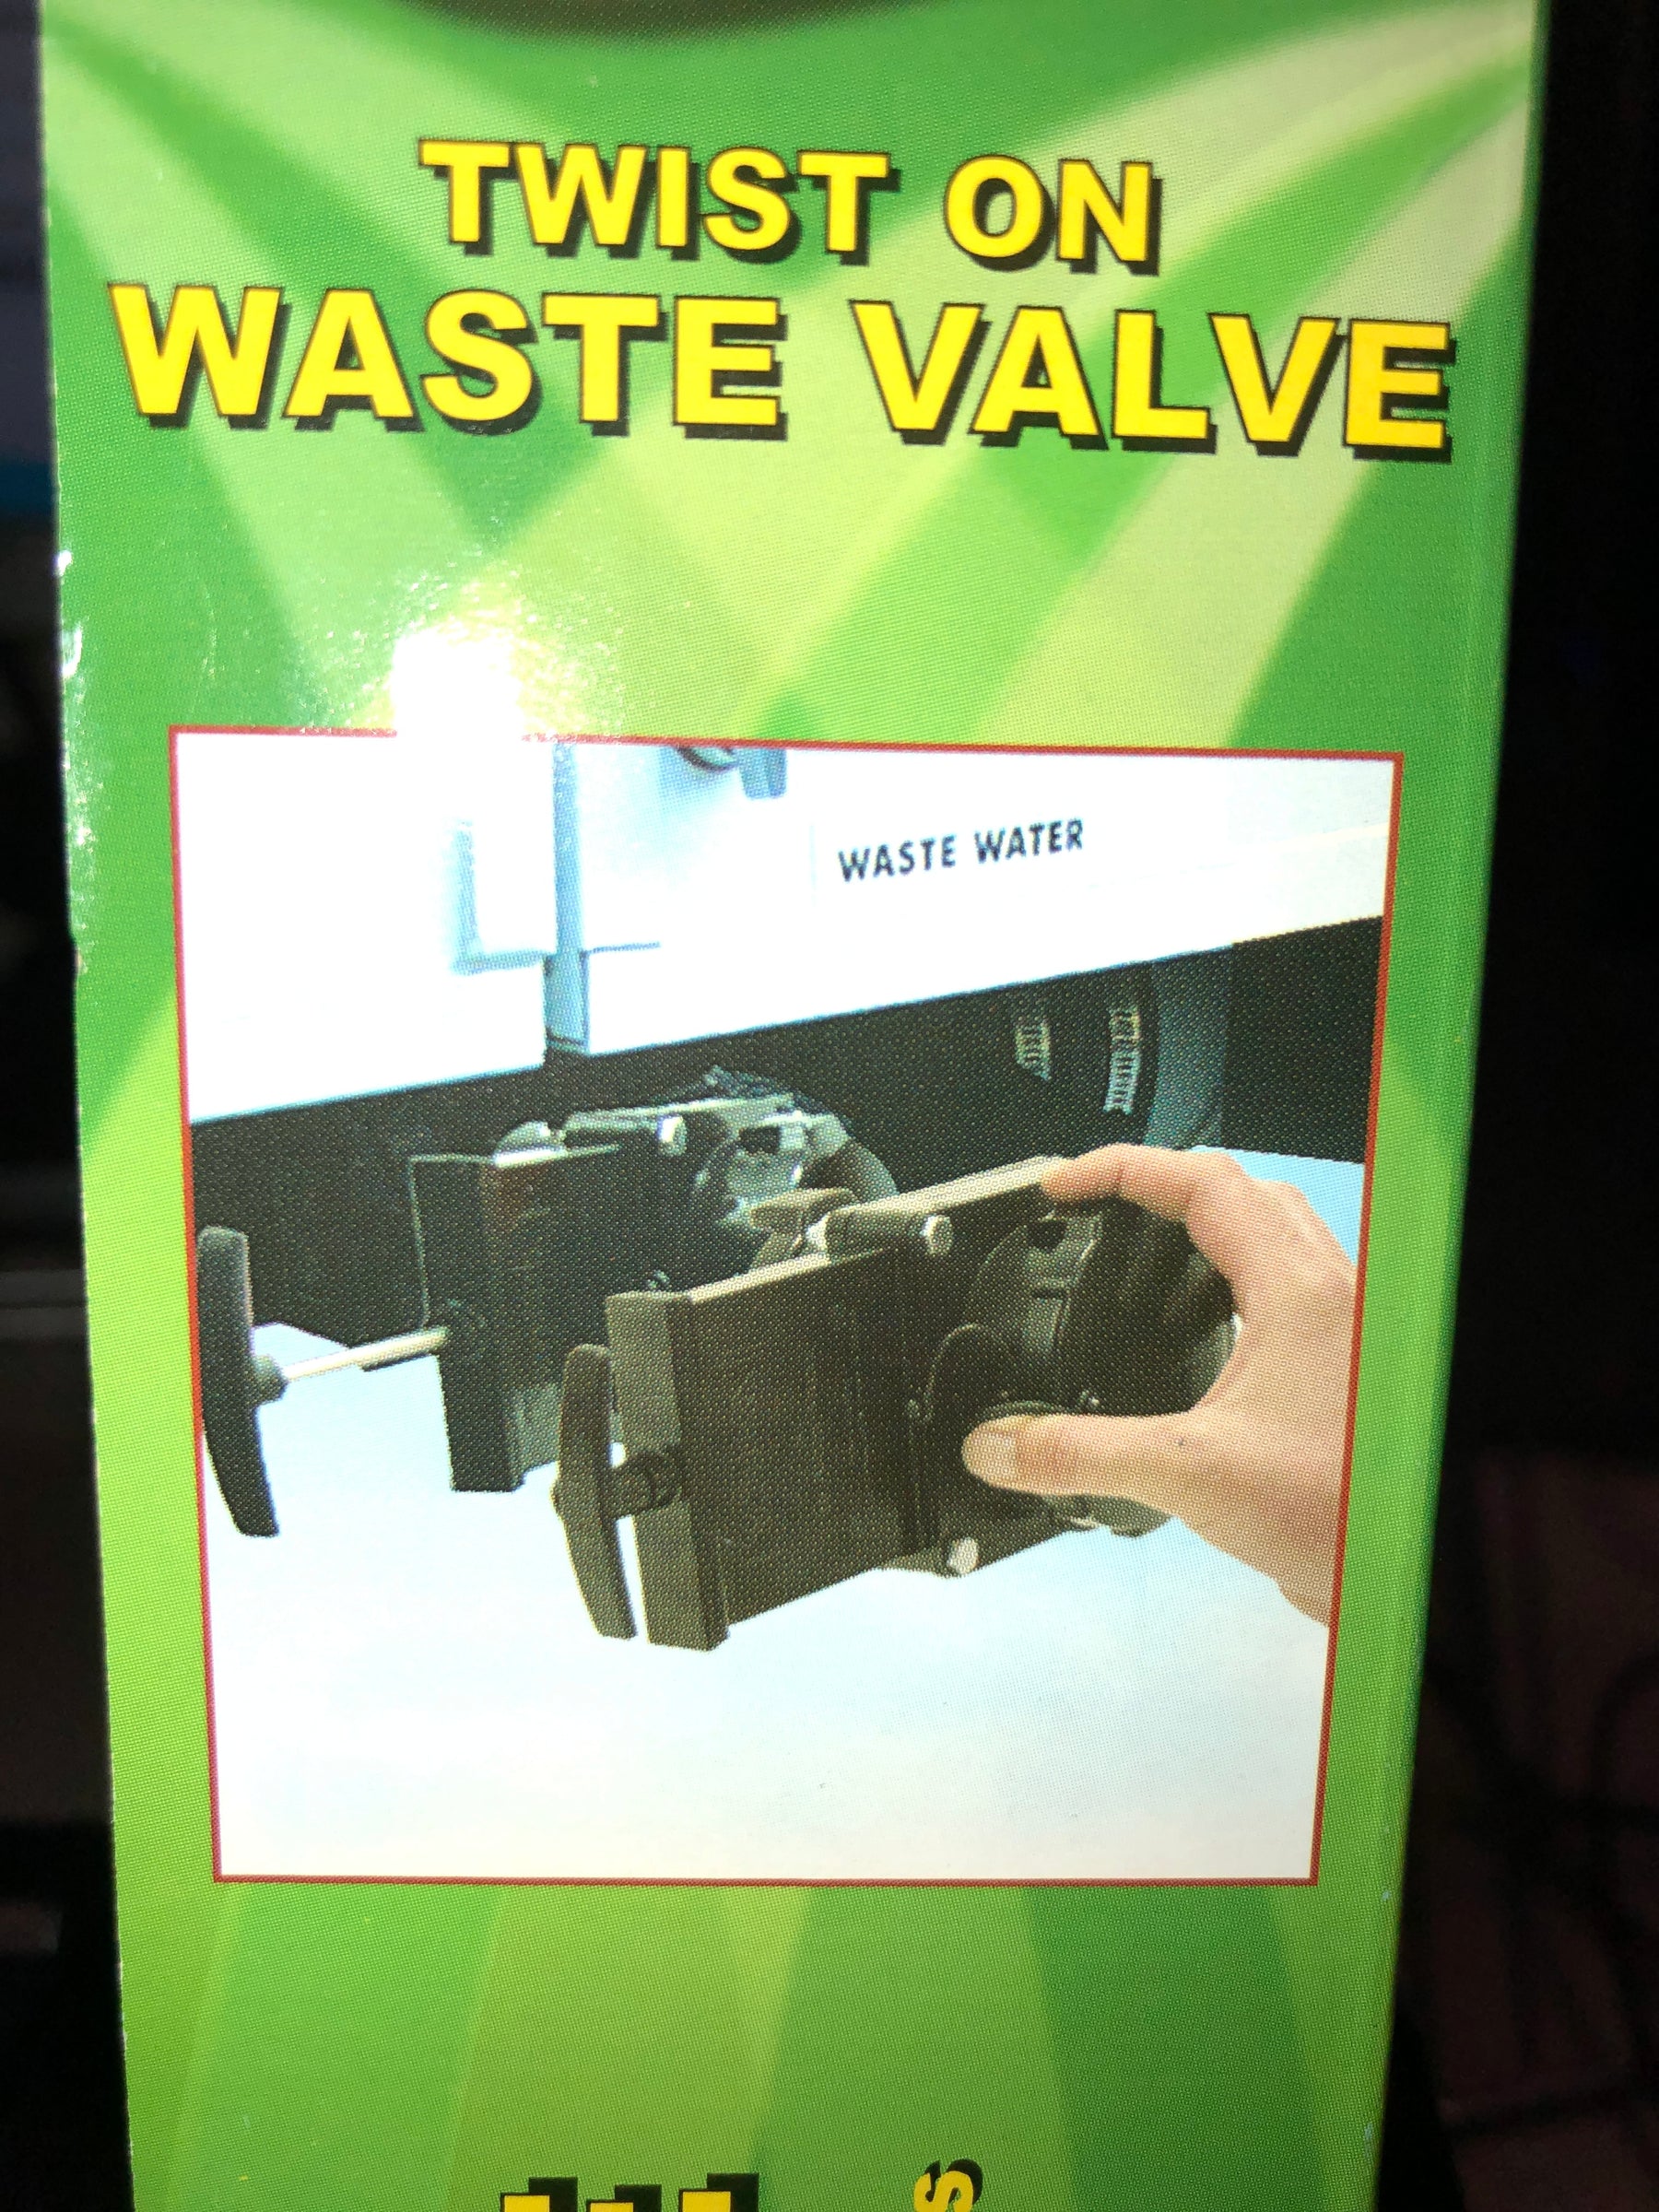 Twist-On Waste Valve, Mess-Free Waste Valve for RV's, Campers, Trailers